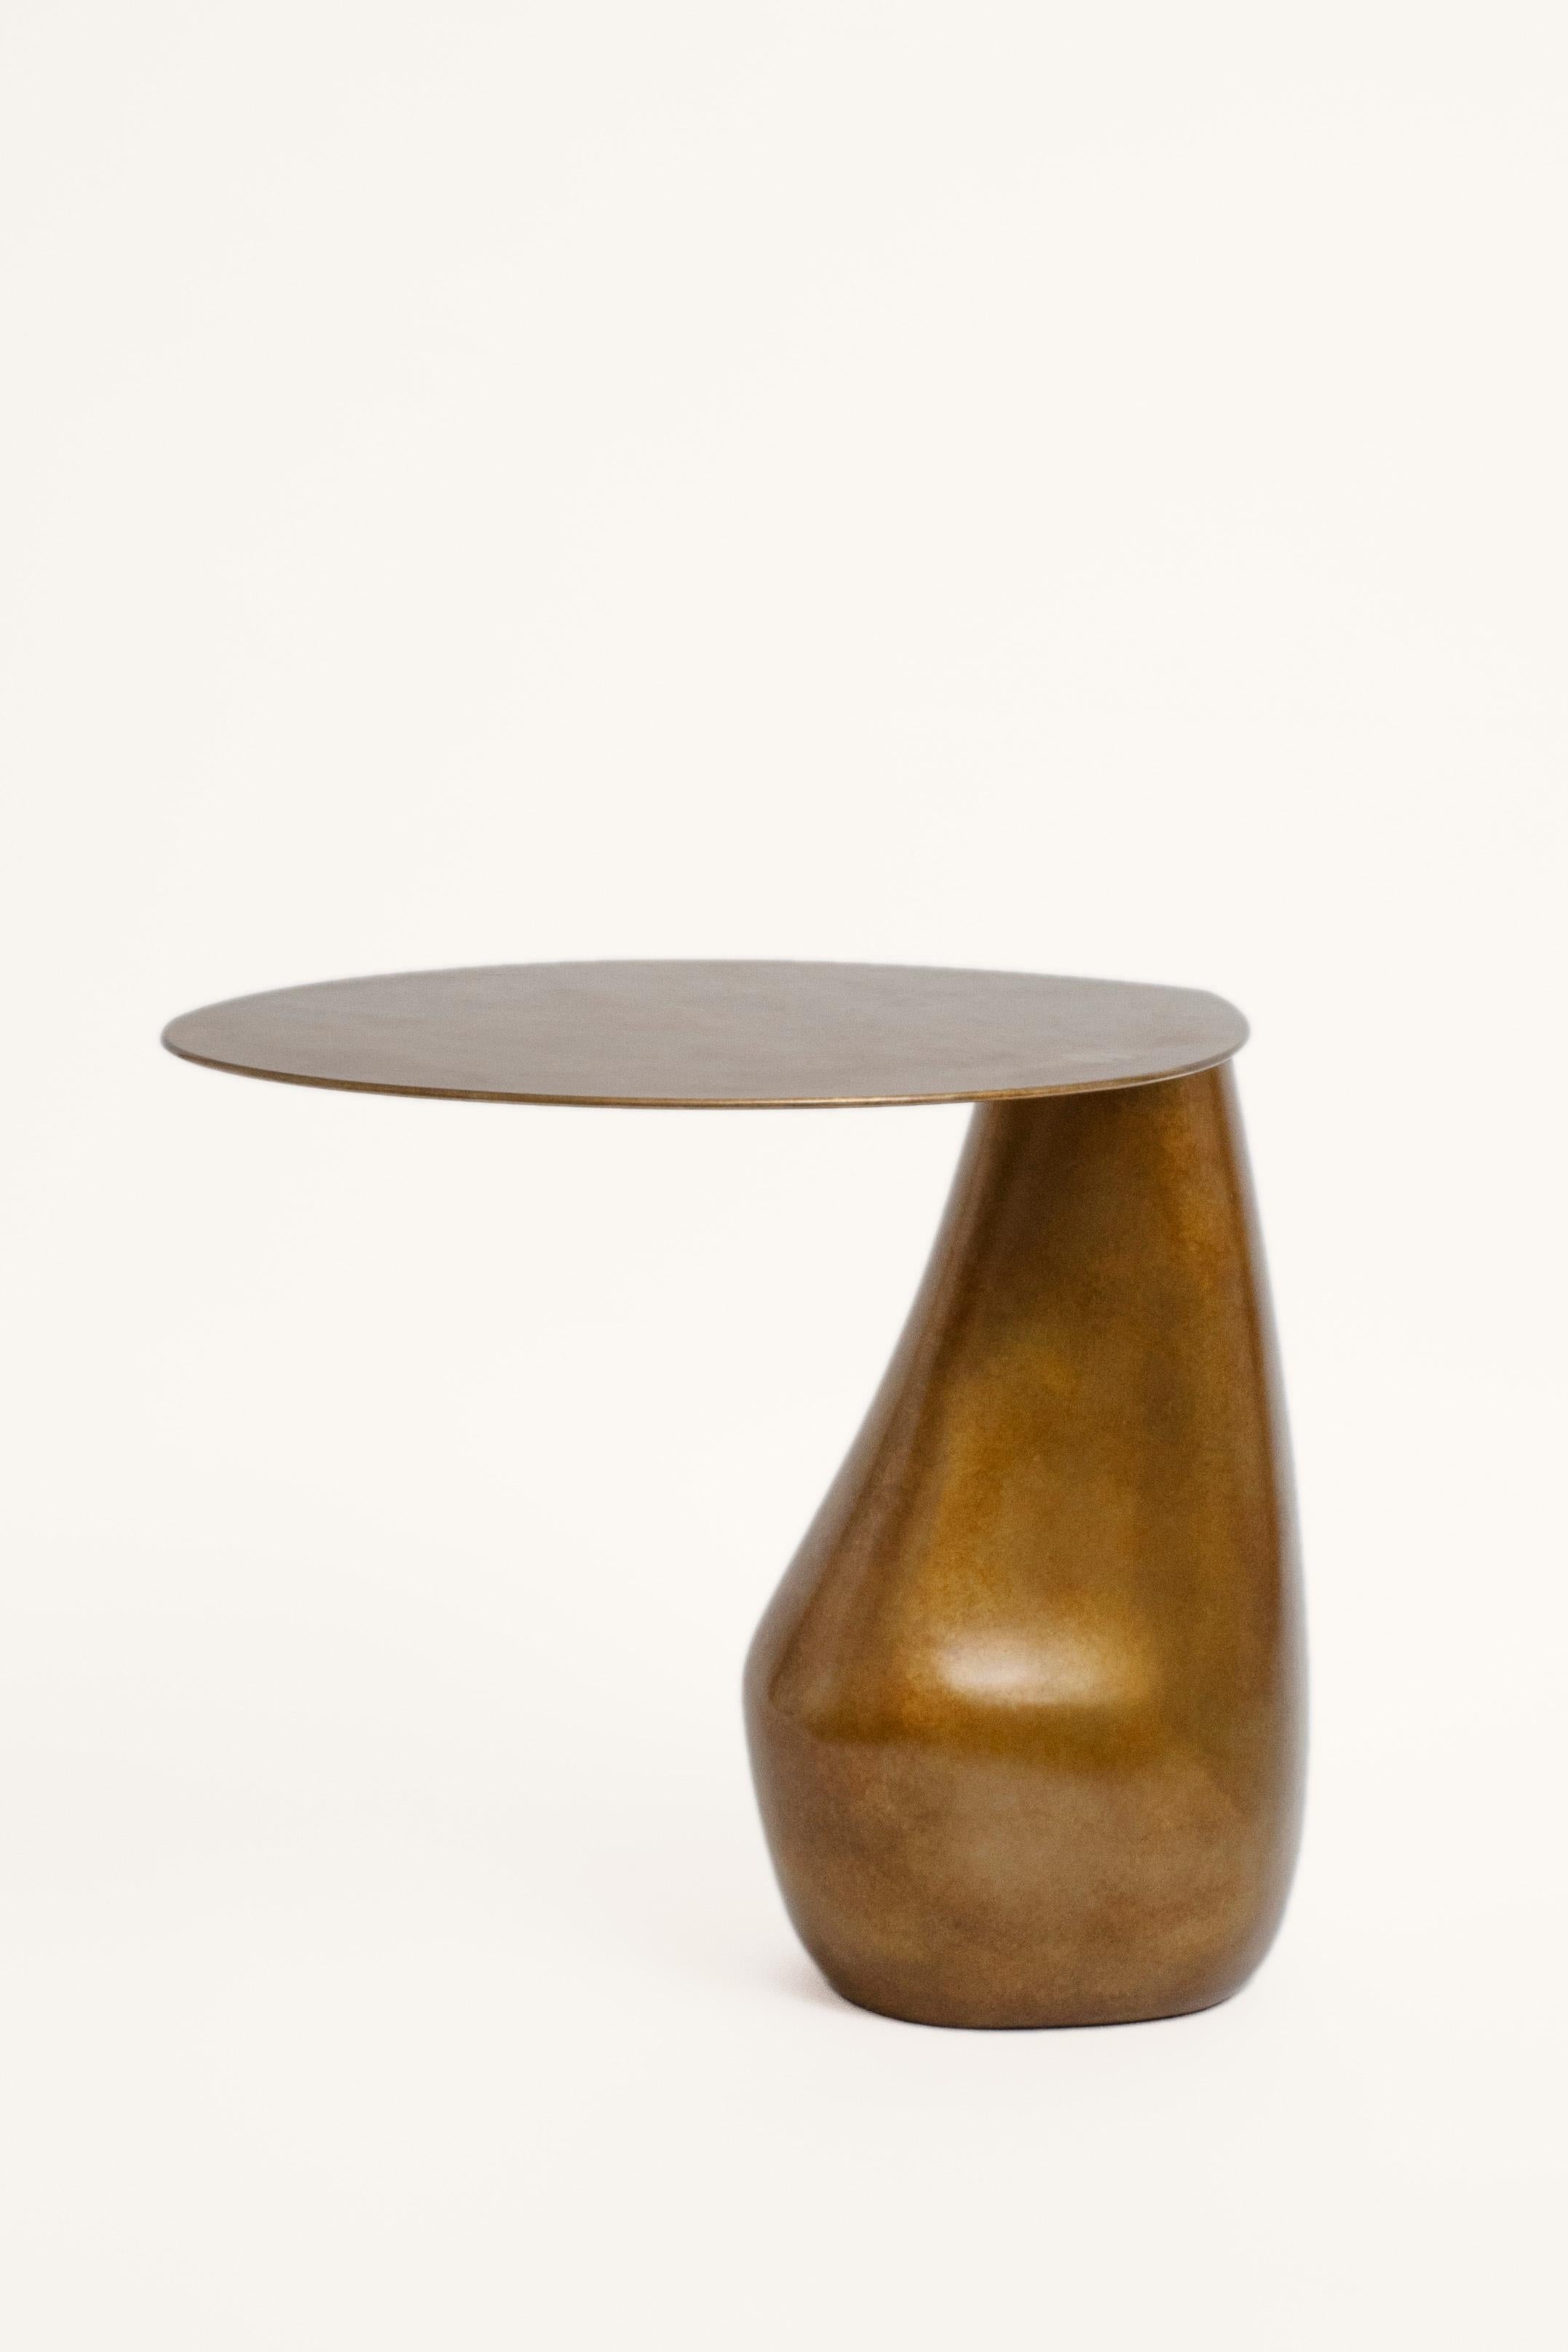 A signature piece from our stone collection, the expertly hand-sculpted Dionis side table evokes the subtle curves and contours of tumbled stones shaped by the ocean. This side table presents as sculpture yet functions as a table.

Also available as